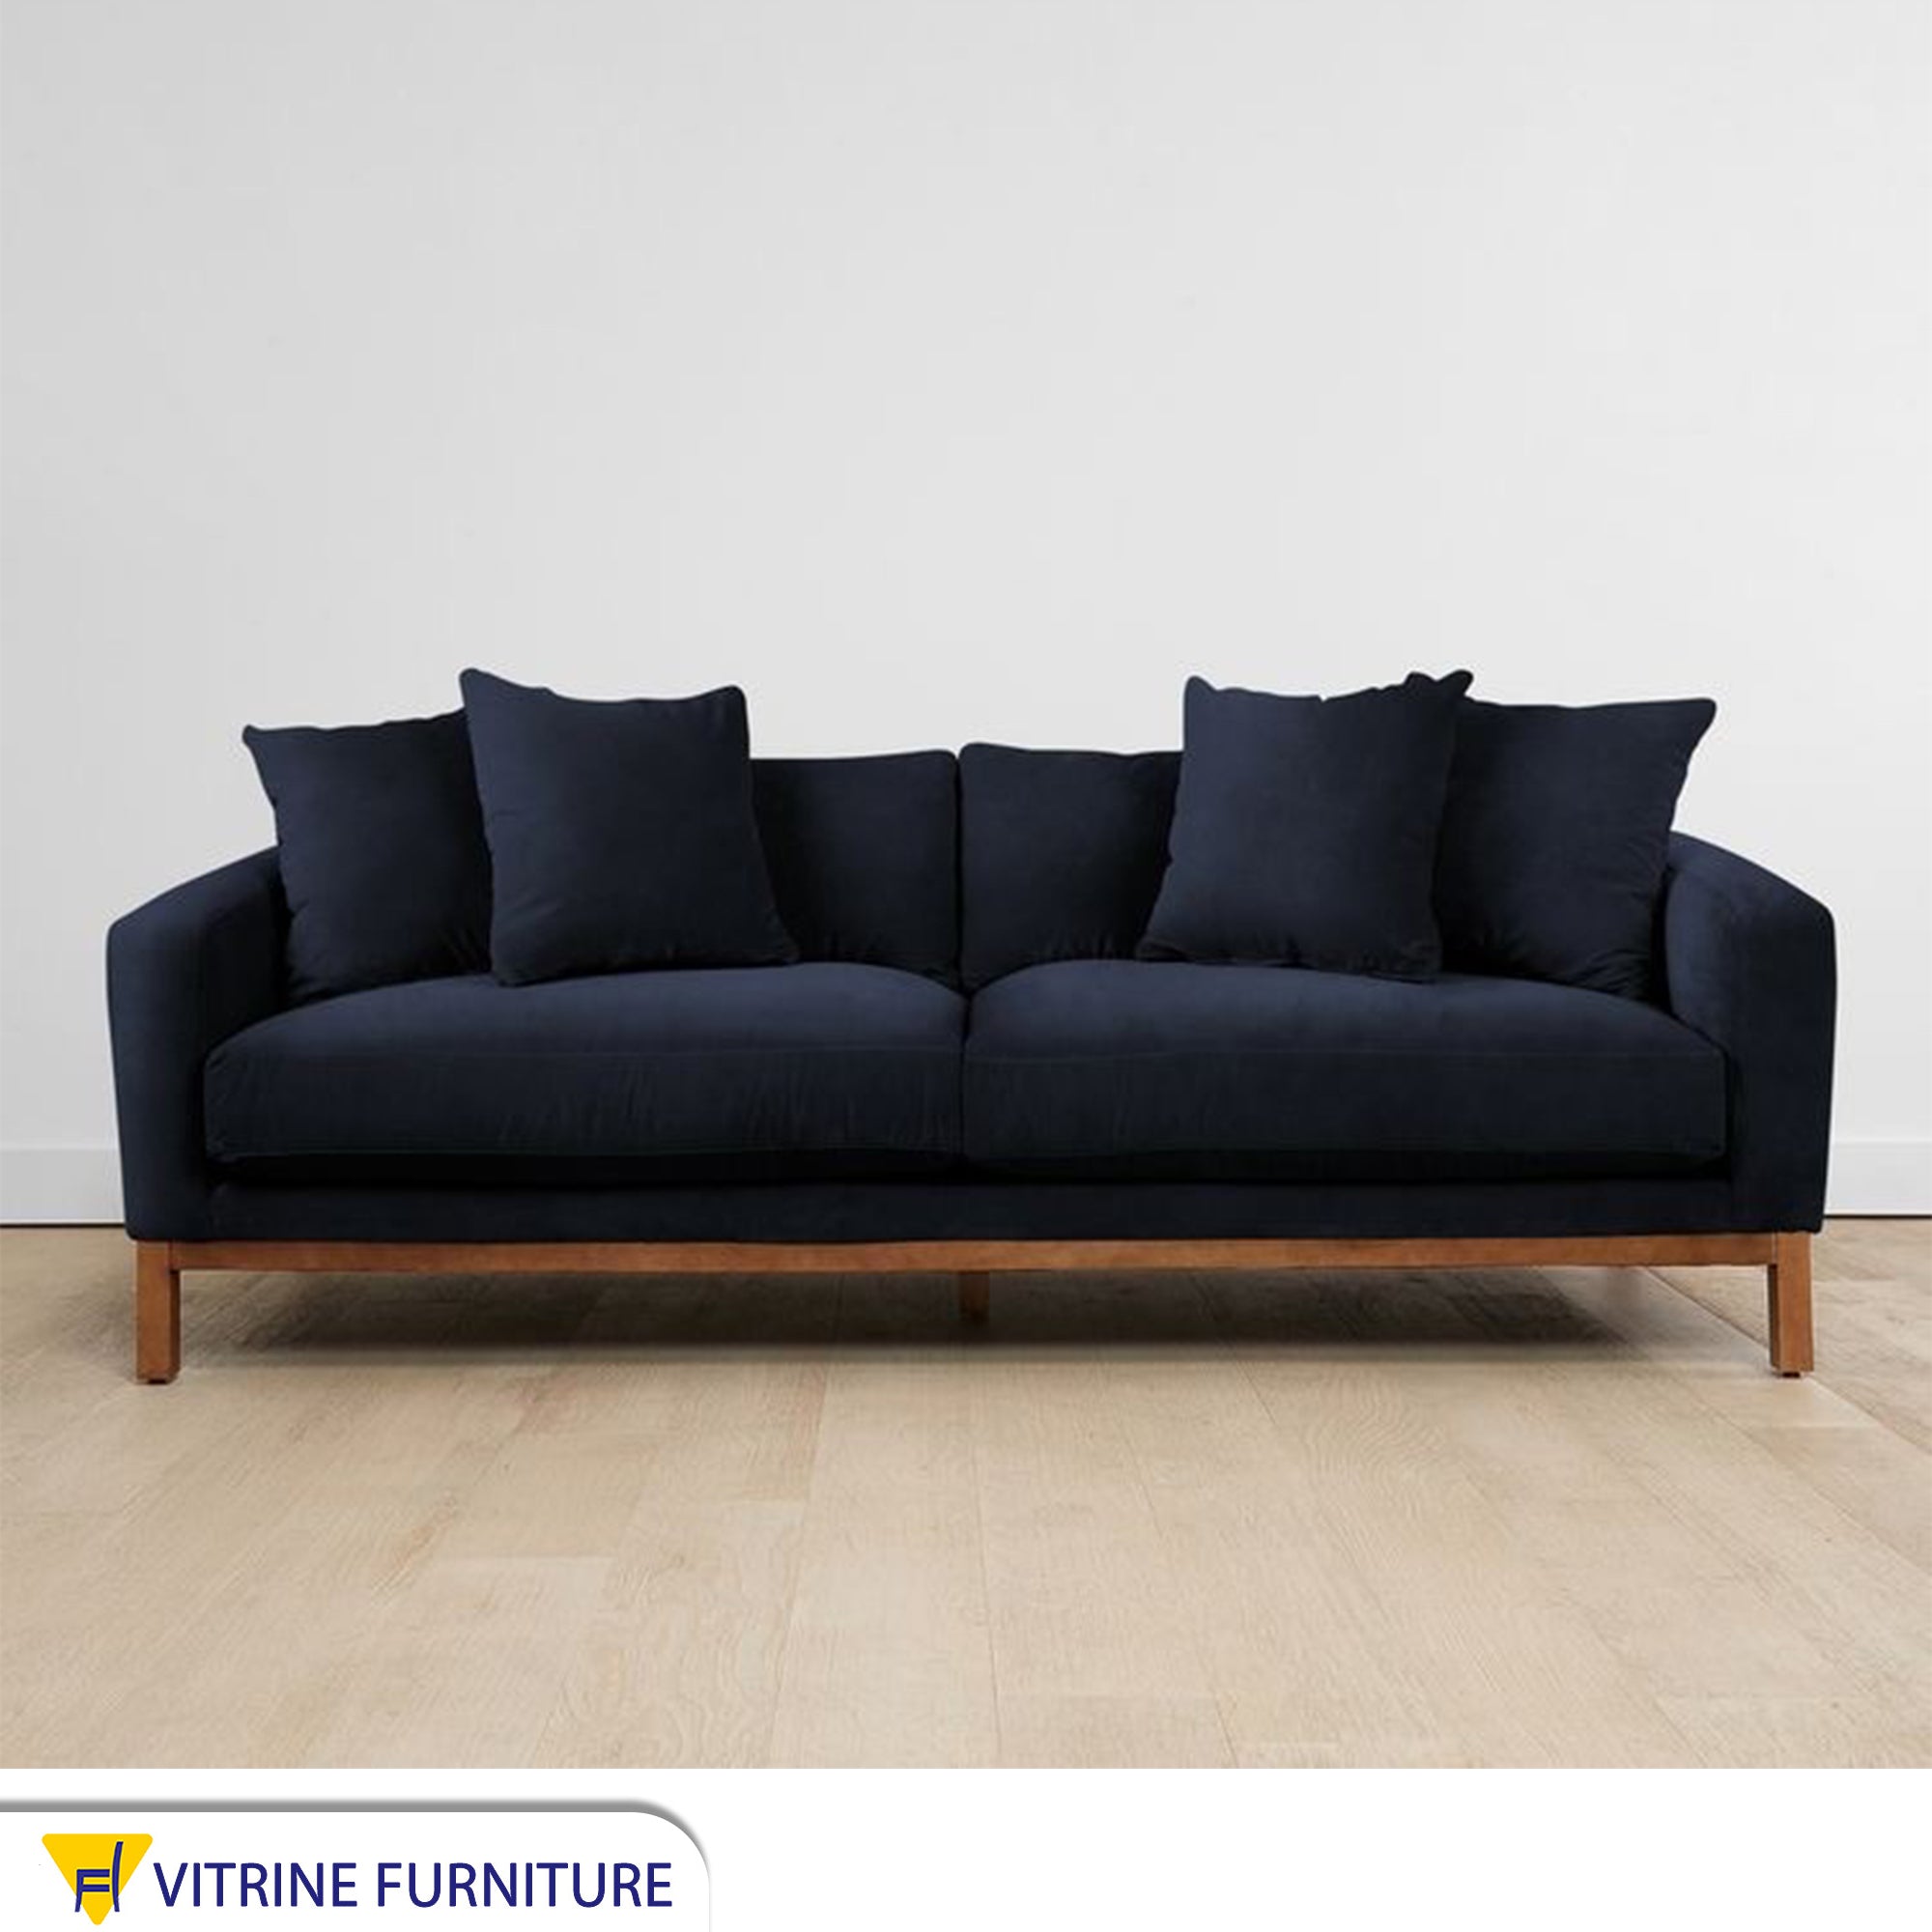 Navy sofa with short wooden legs